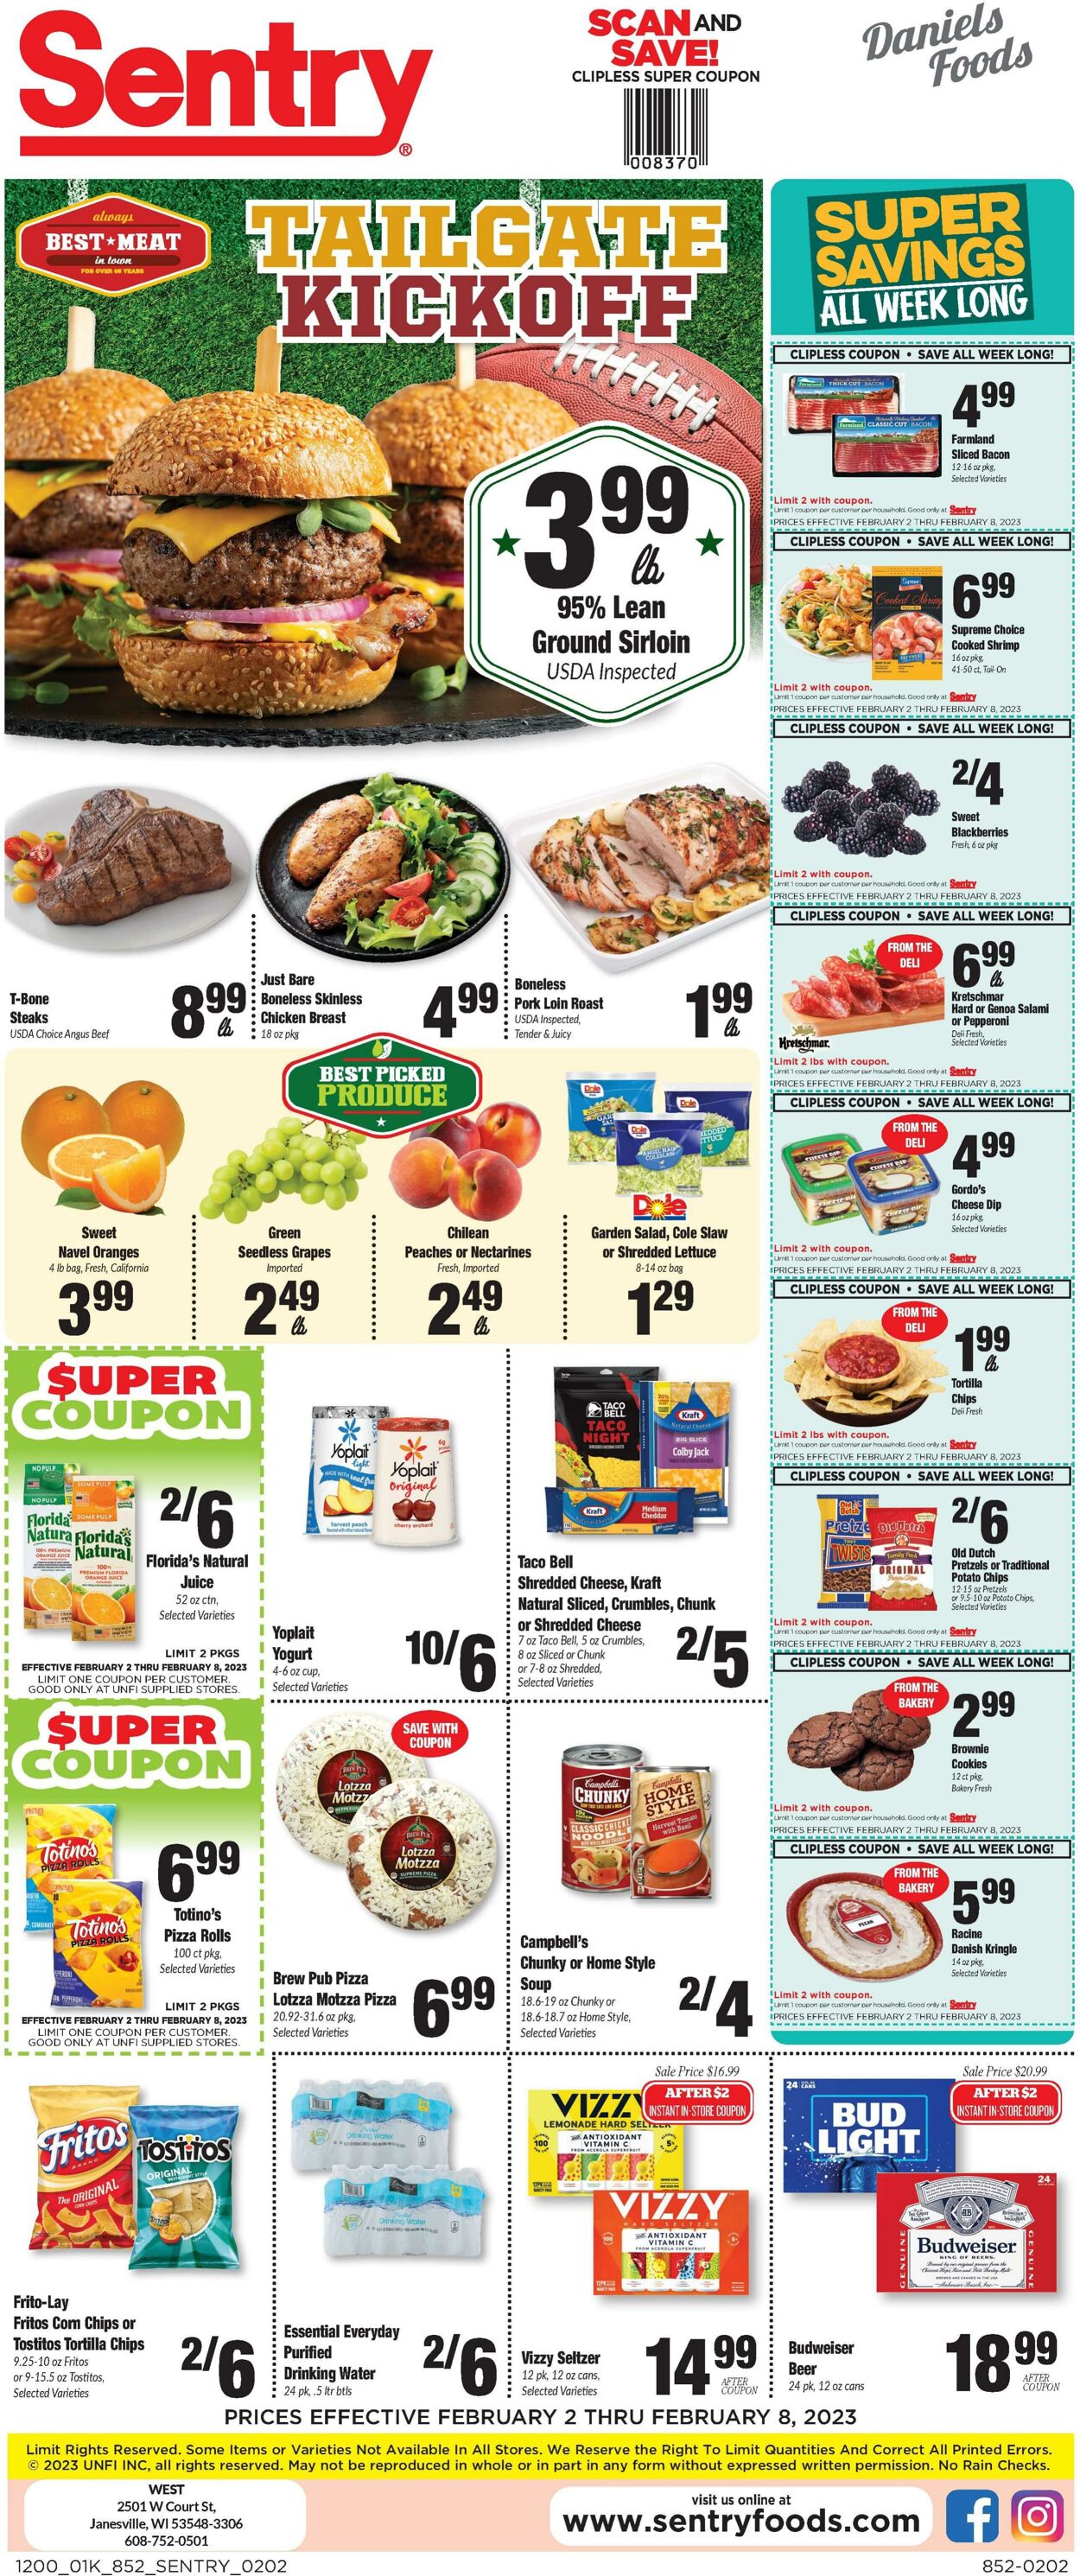 Sentry Promotional weekly ads